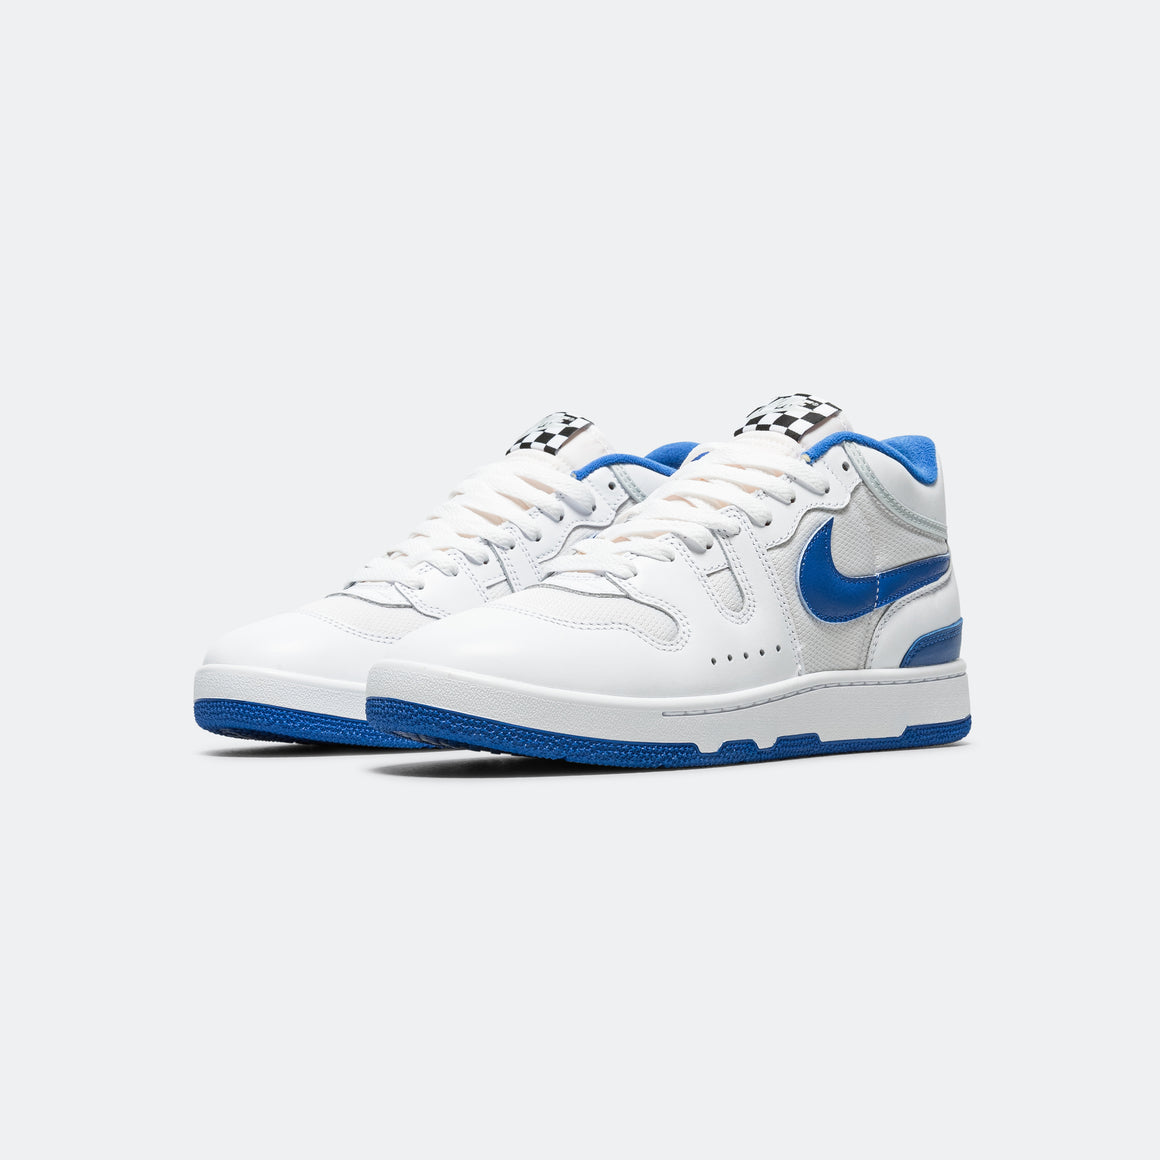 Nike - Attack - White/Game Royal-Pure Platinum-Black - UP THERE